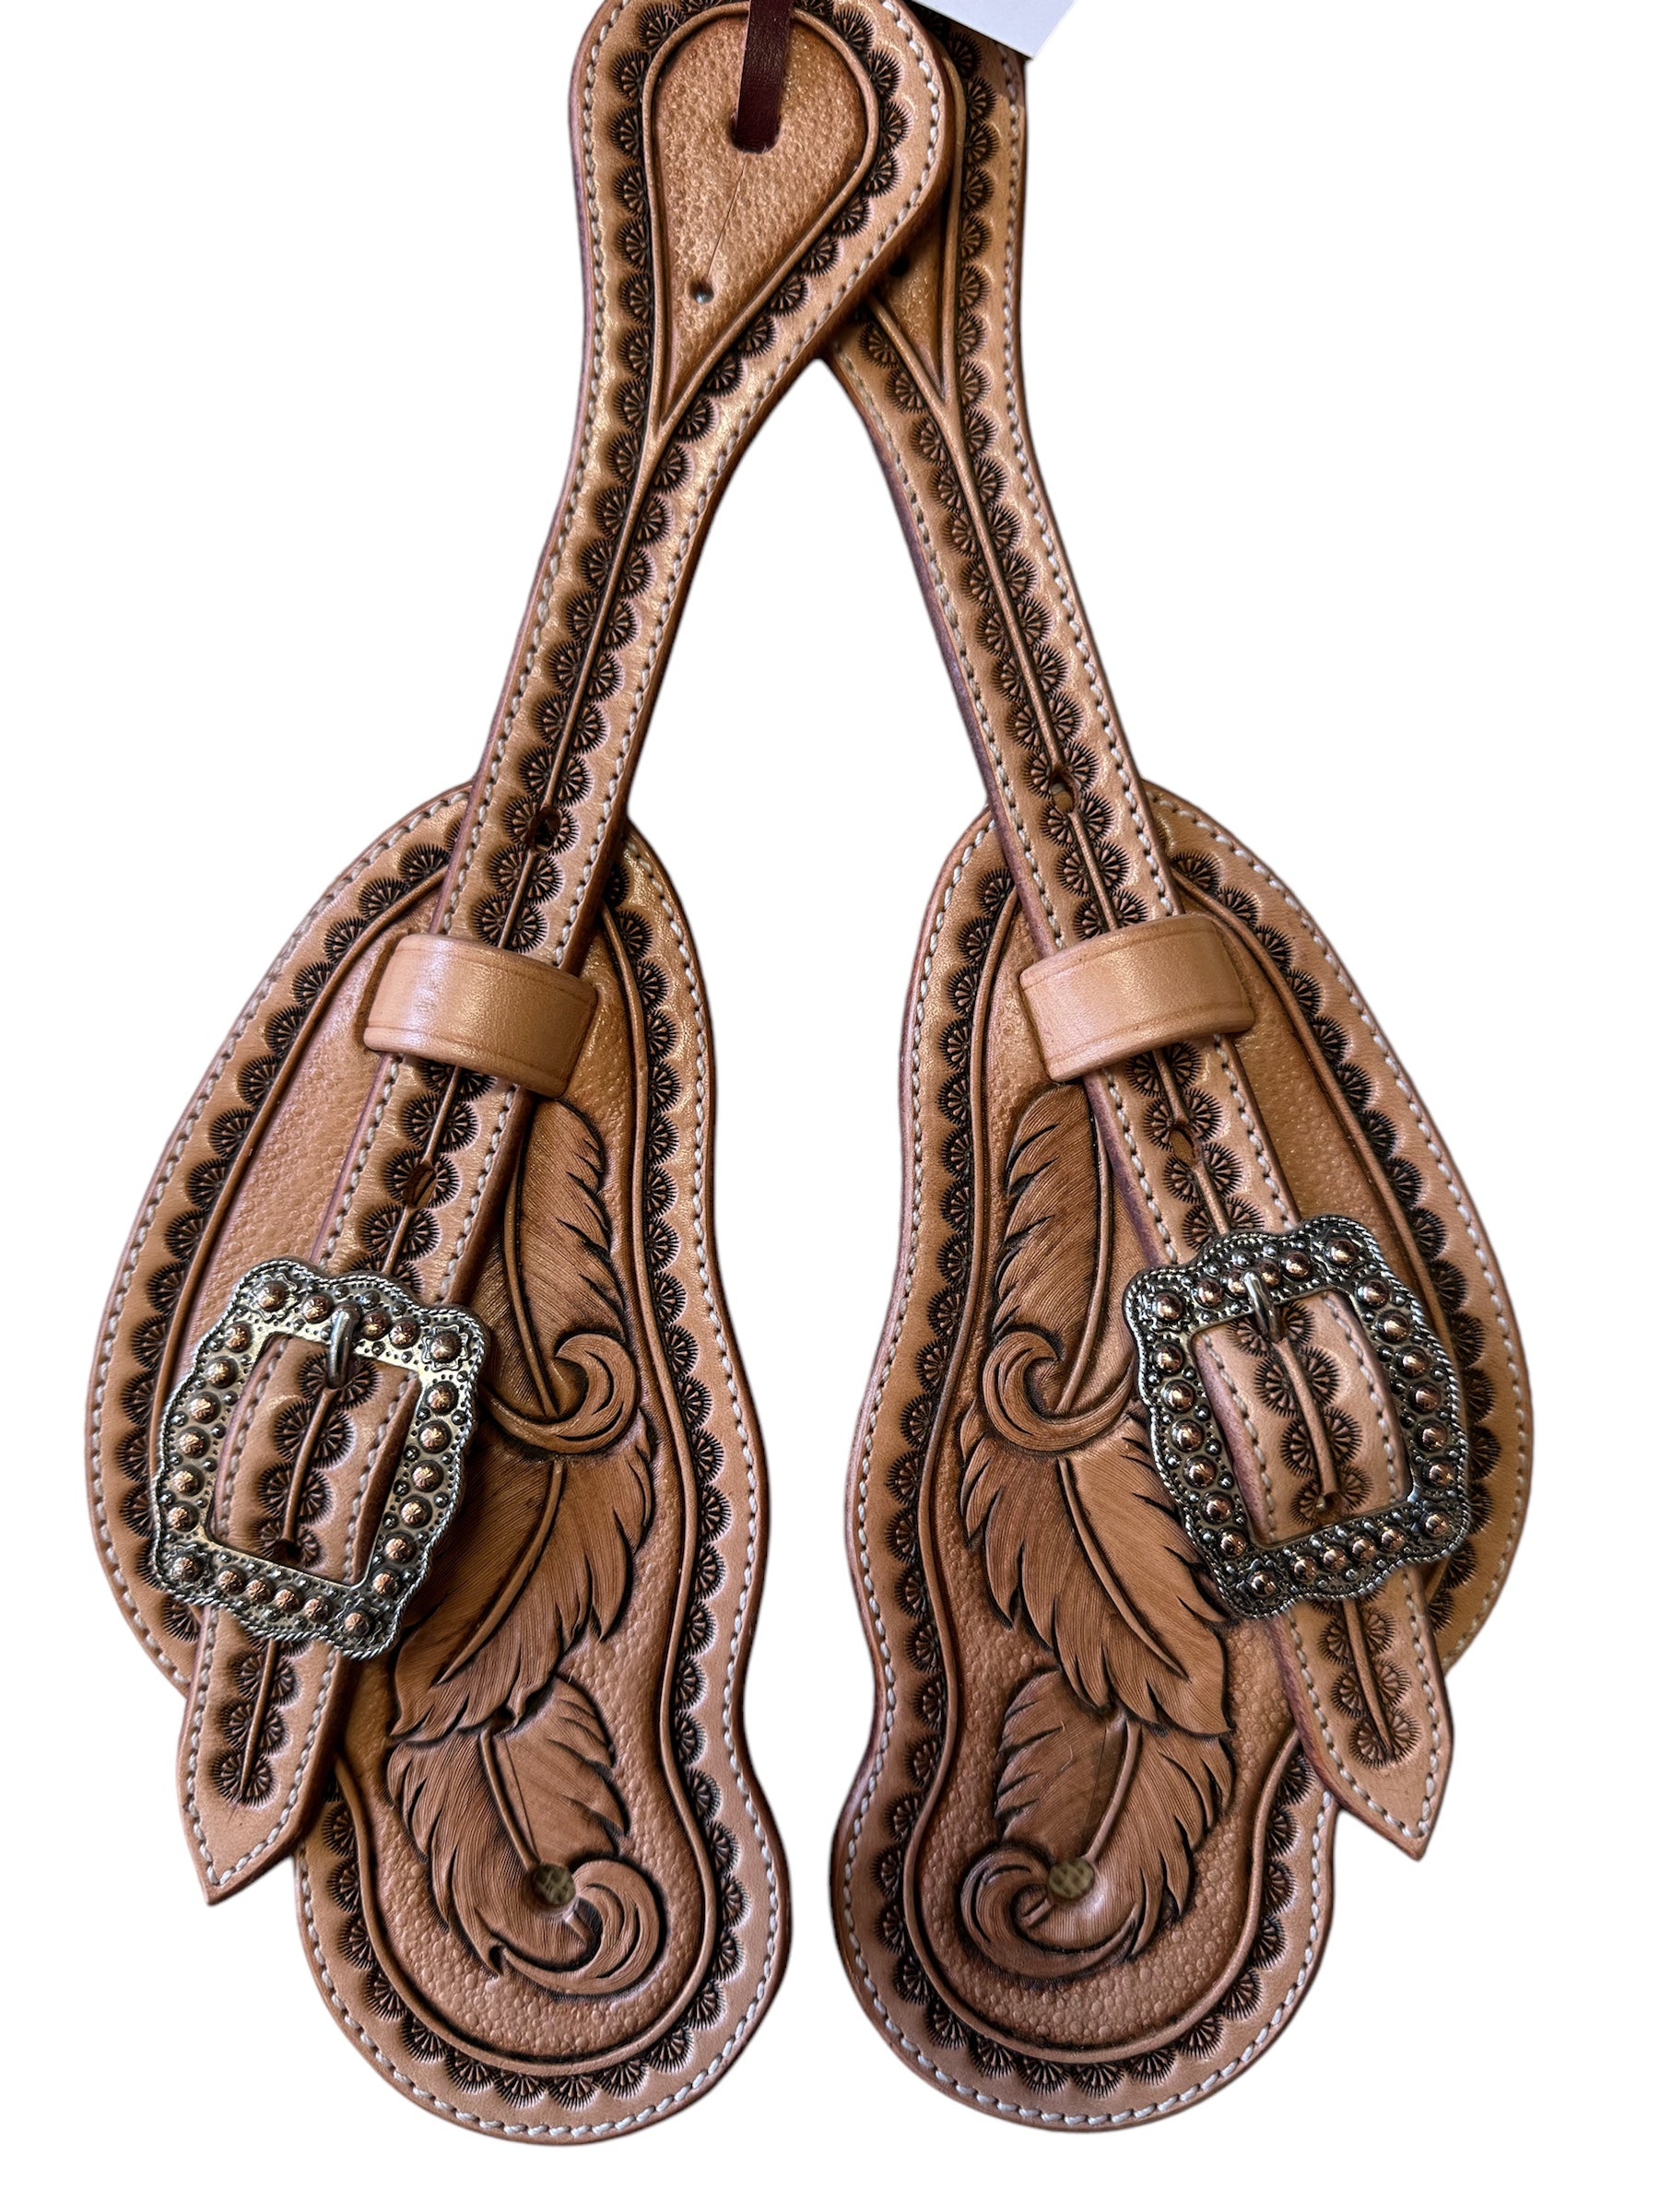 Buckaroo Style Spur Straps with Feathers and Floral Border